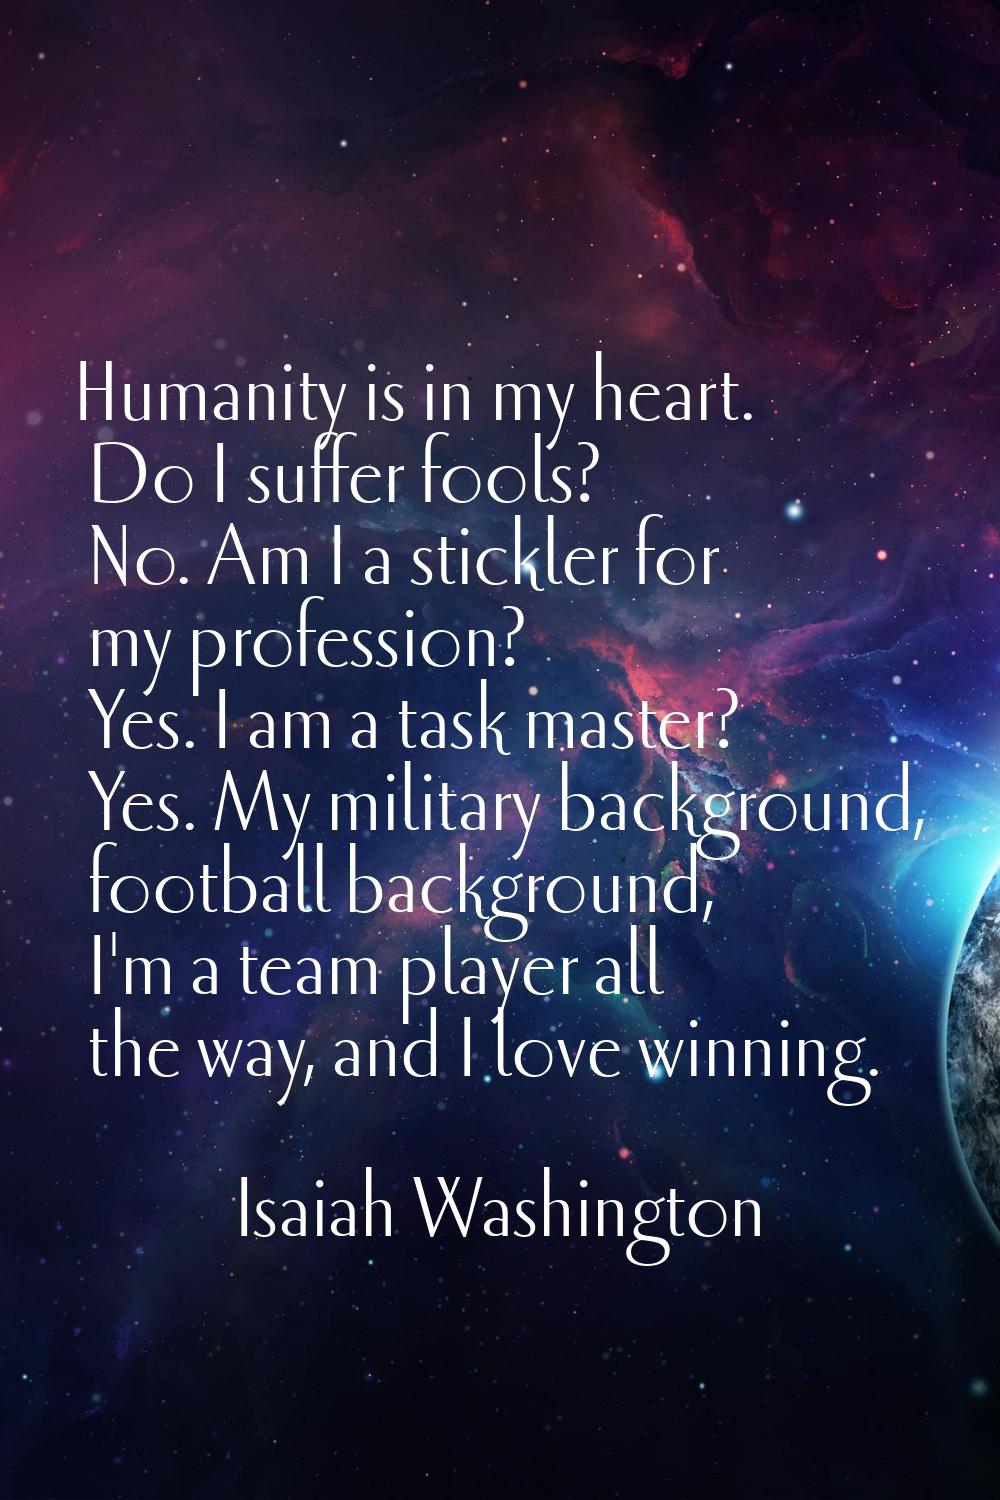 Humanity is in my heart. Do I suffer fools? No. Am I a stickler for my profession? Yes. I am a task